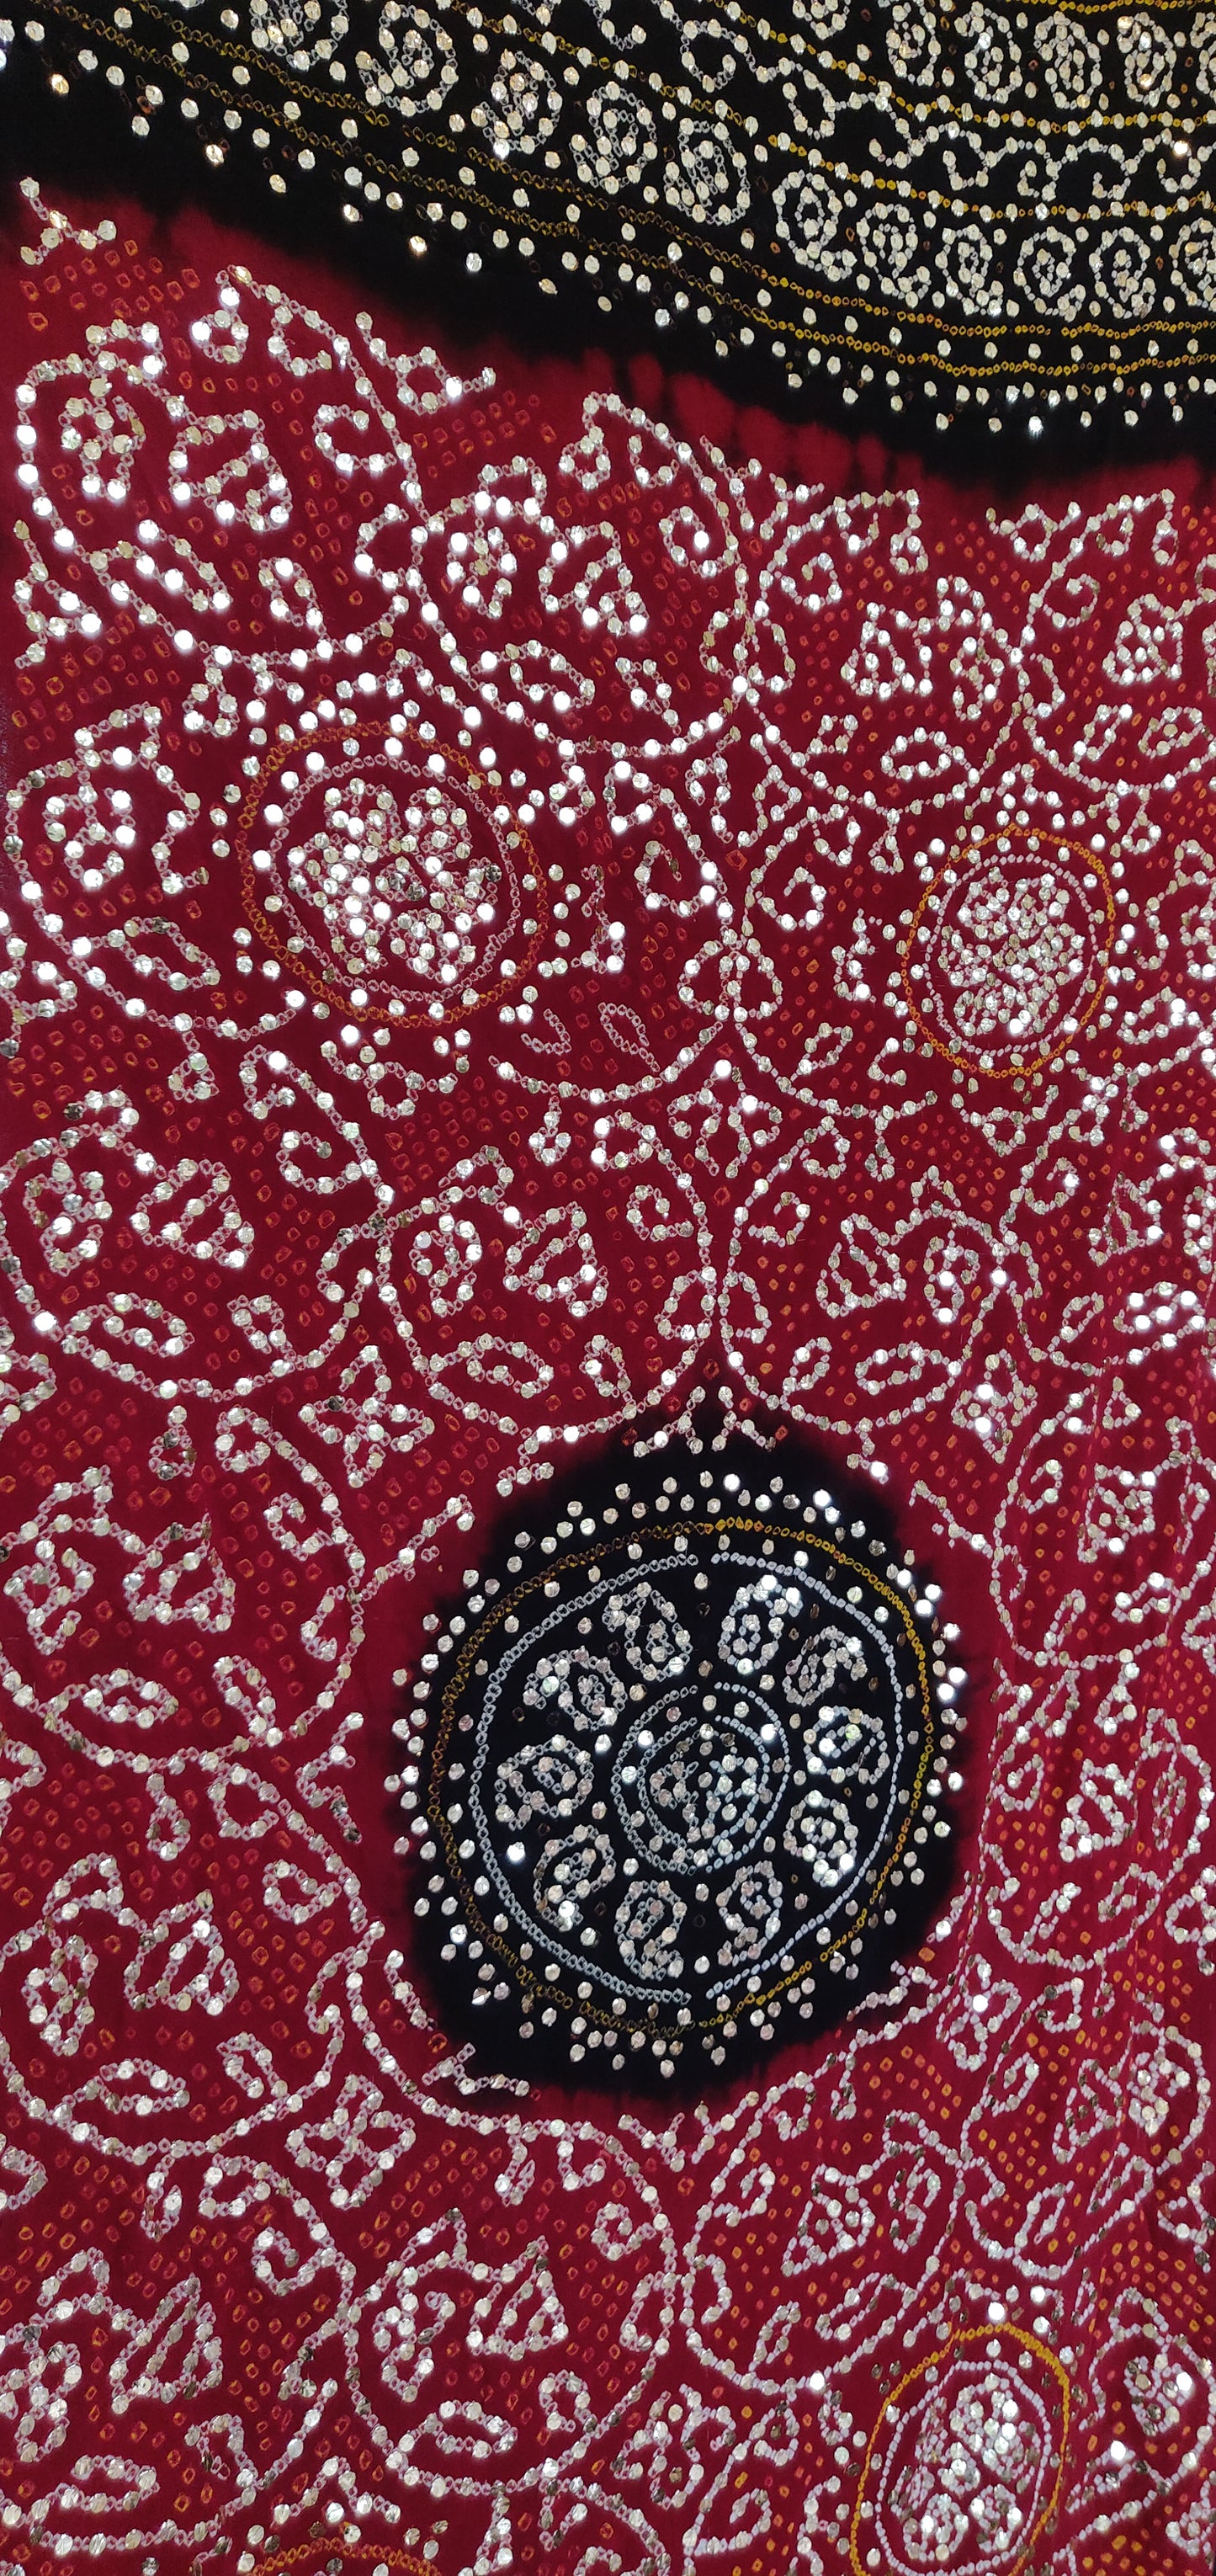 Black and Red pure georgette bandhej dupatta with heavy mukaish work